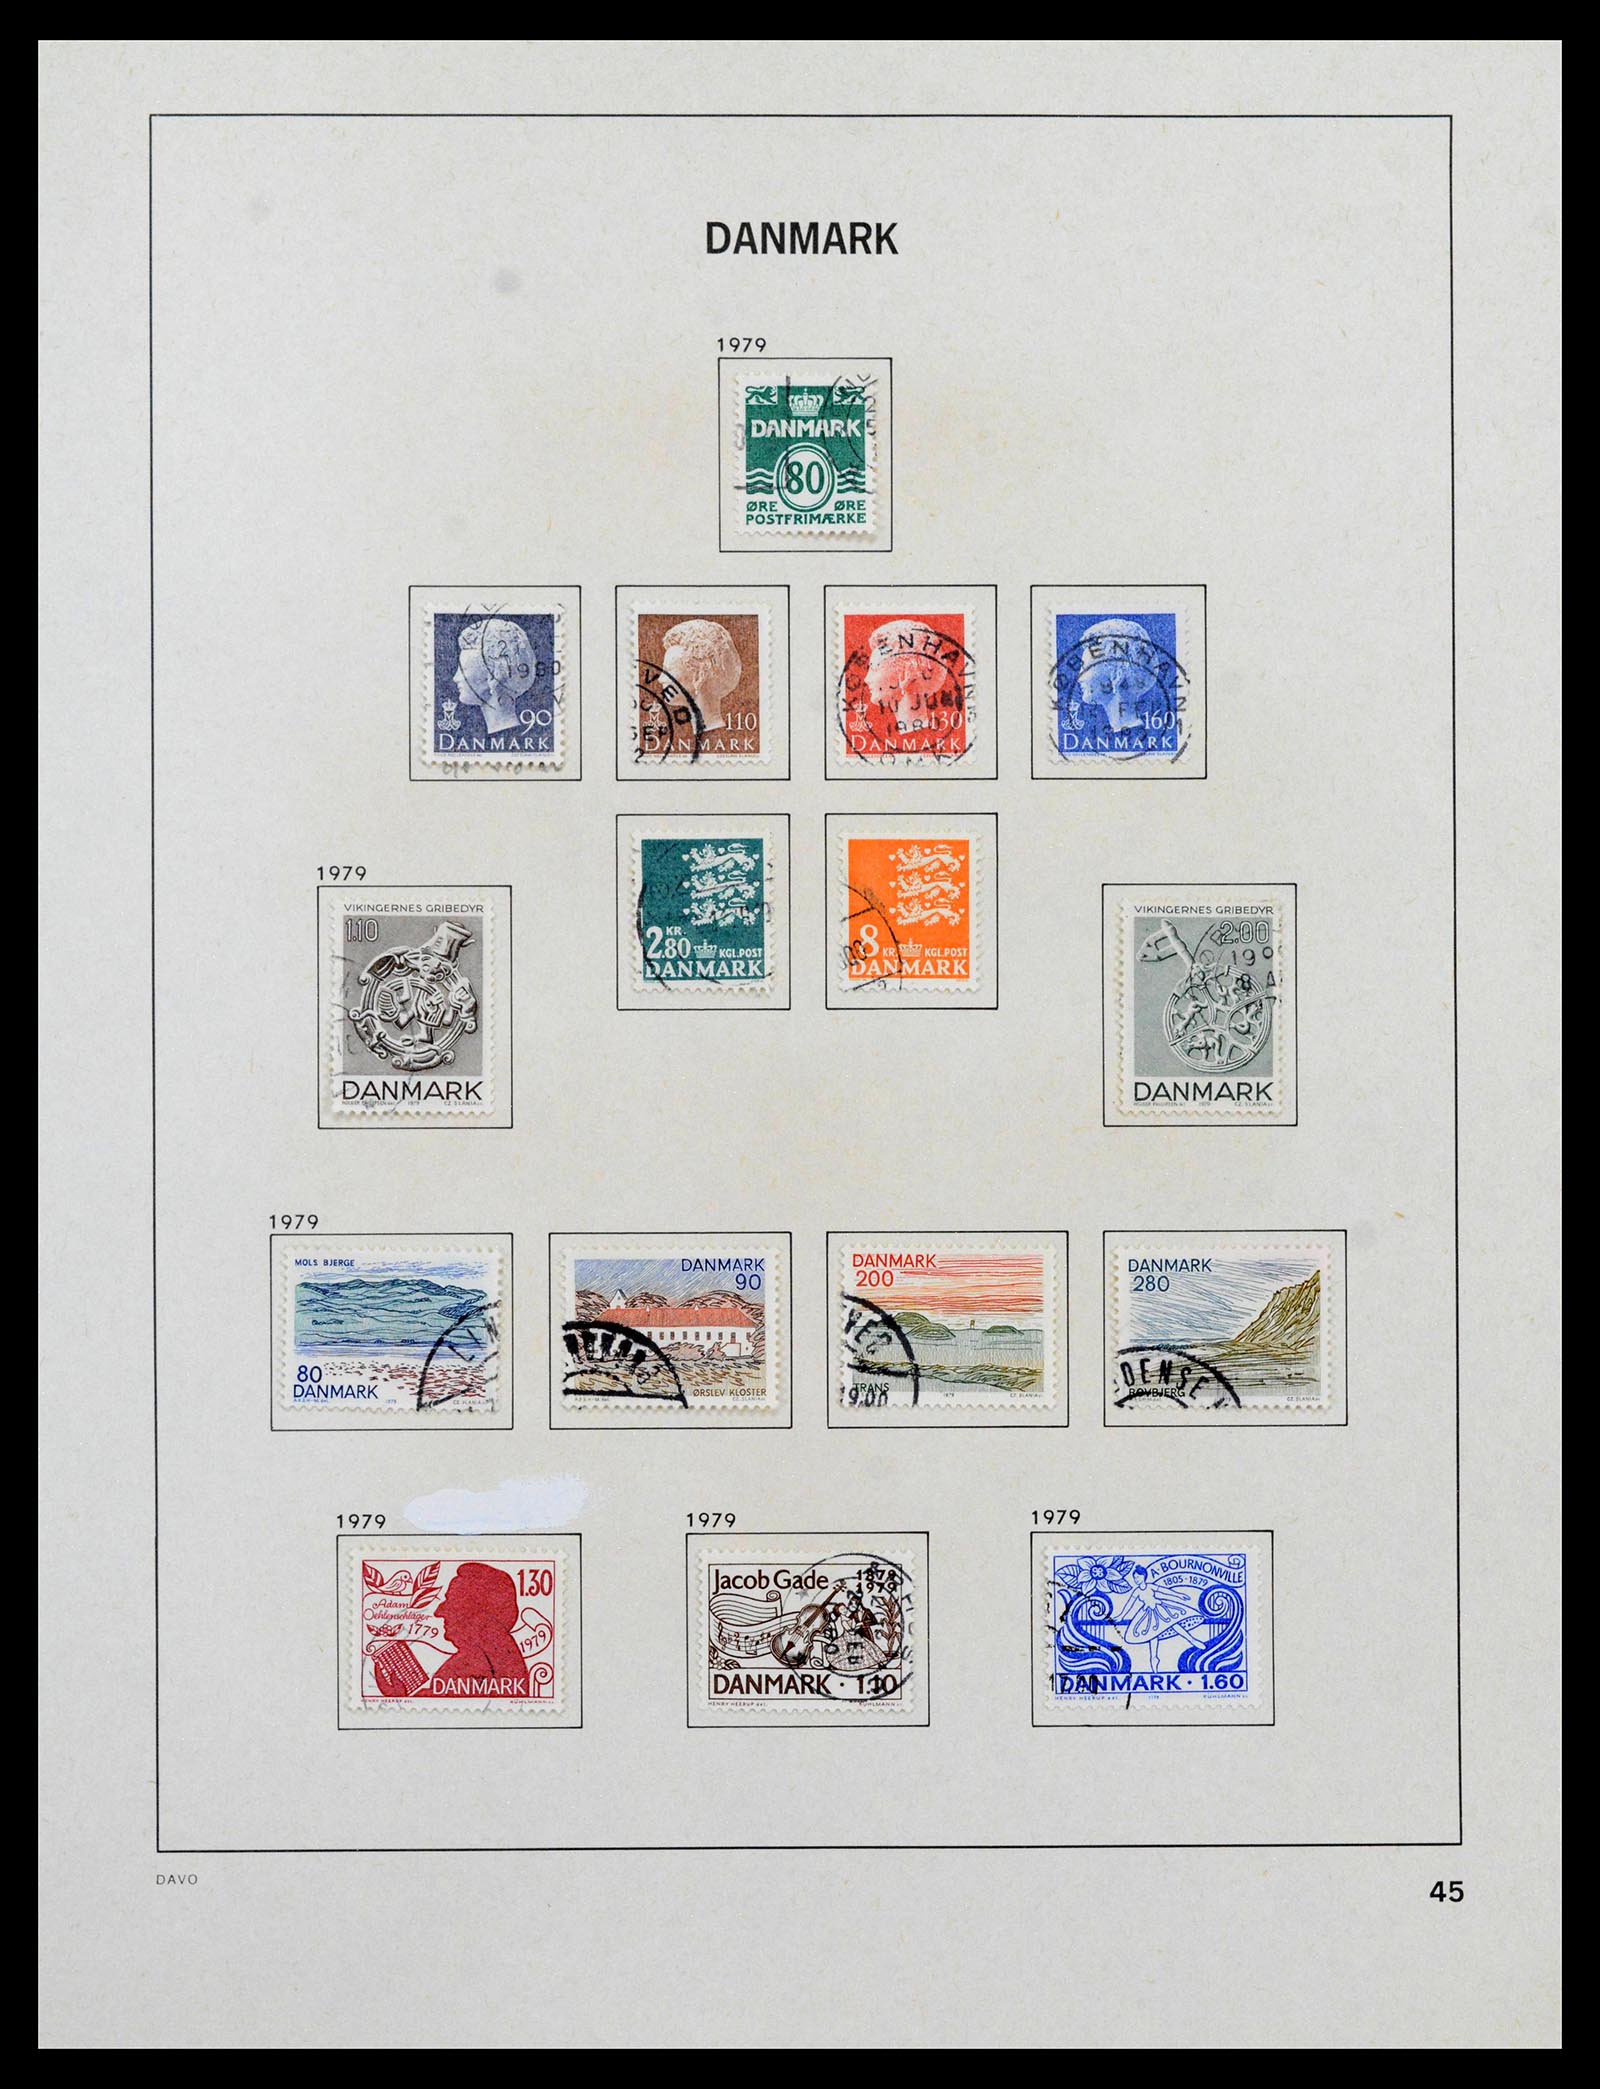 39428 0047 - Stamp collection 39428 Denmark 1851-2019.